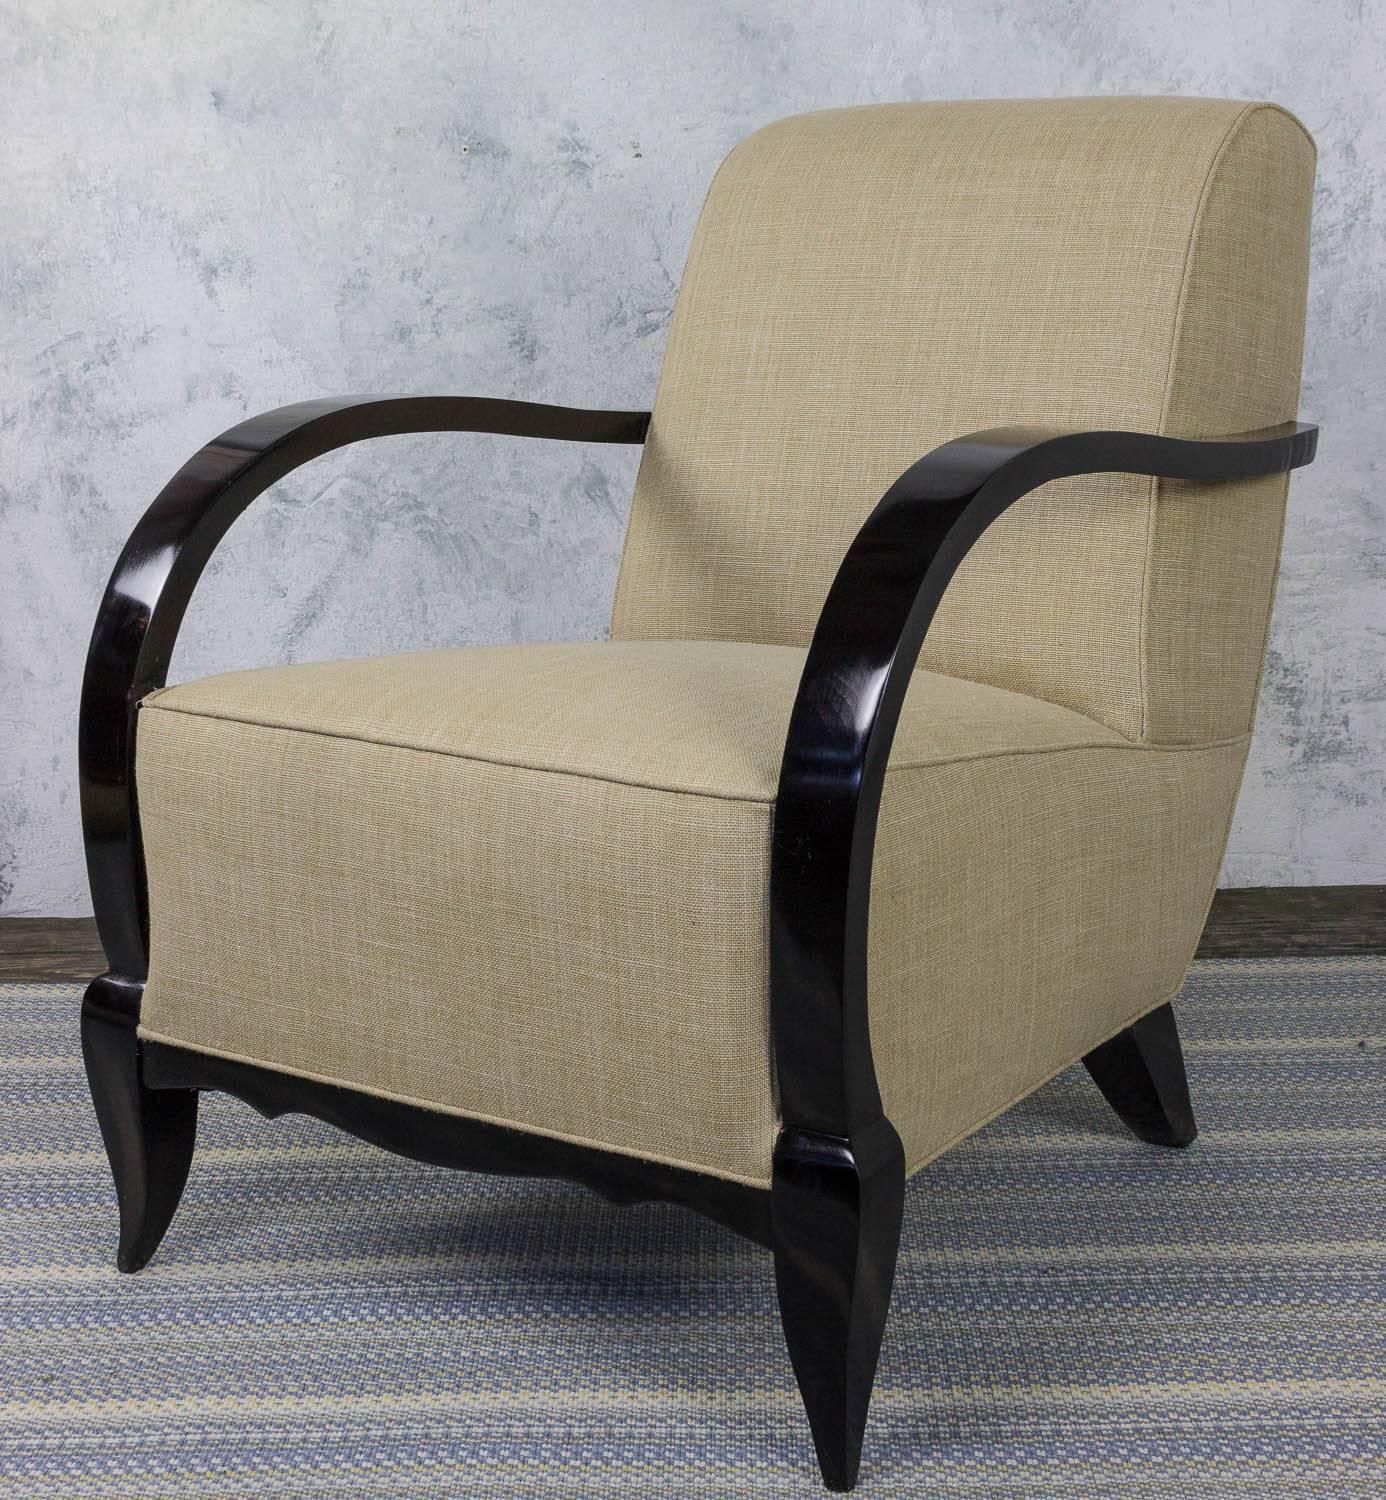 A stunning pair of French 1940s Art Deco club style armchairs with ebonized arms and legs. These classic chairs are in excellent condition and are newly upholstered in durable Belgian linen. The gorgeous ebonized arms and legs make them the perfect